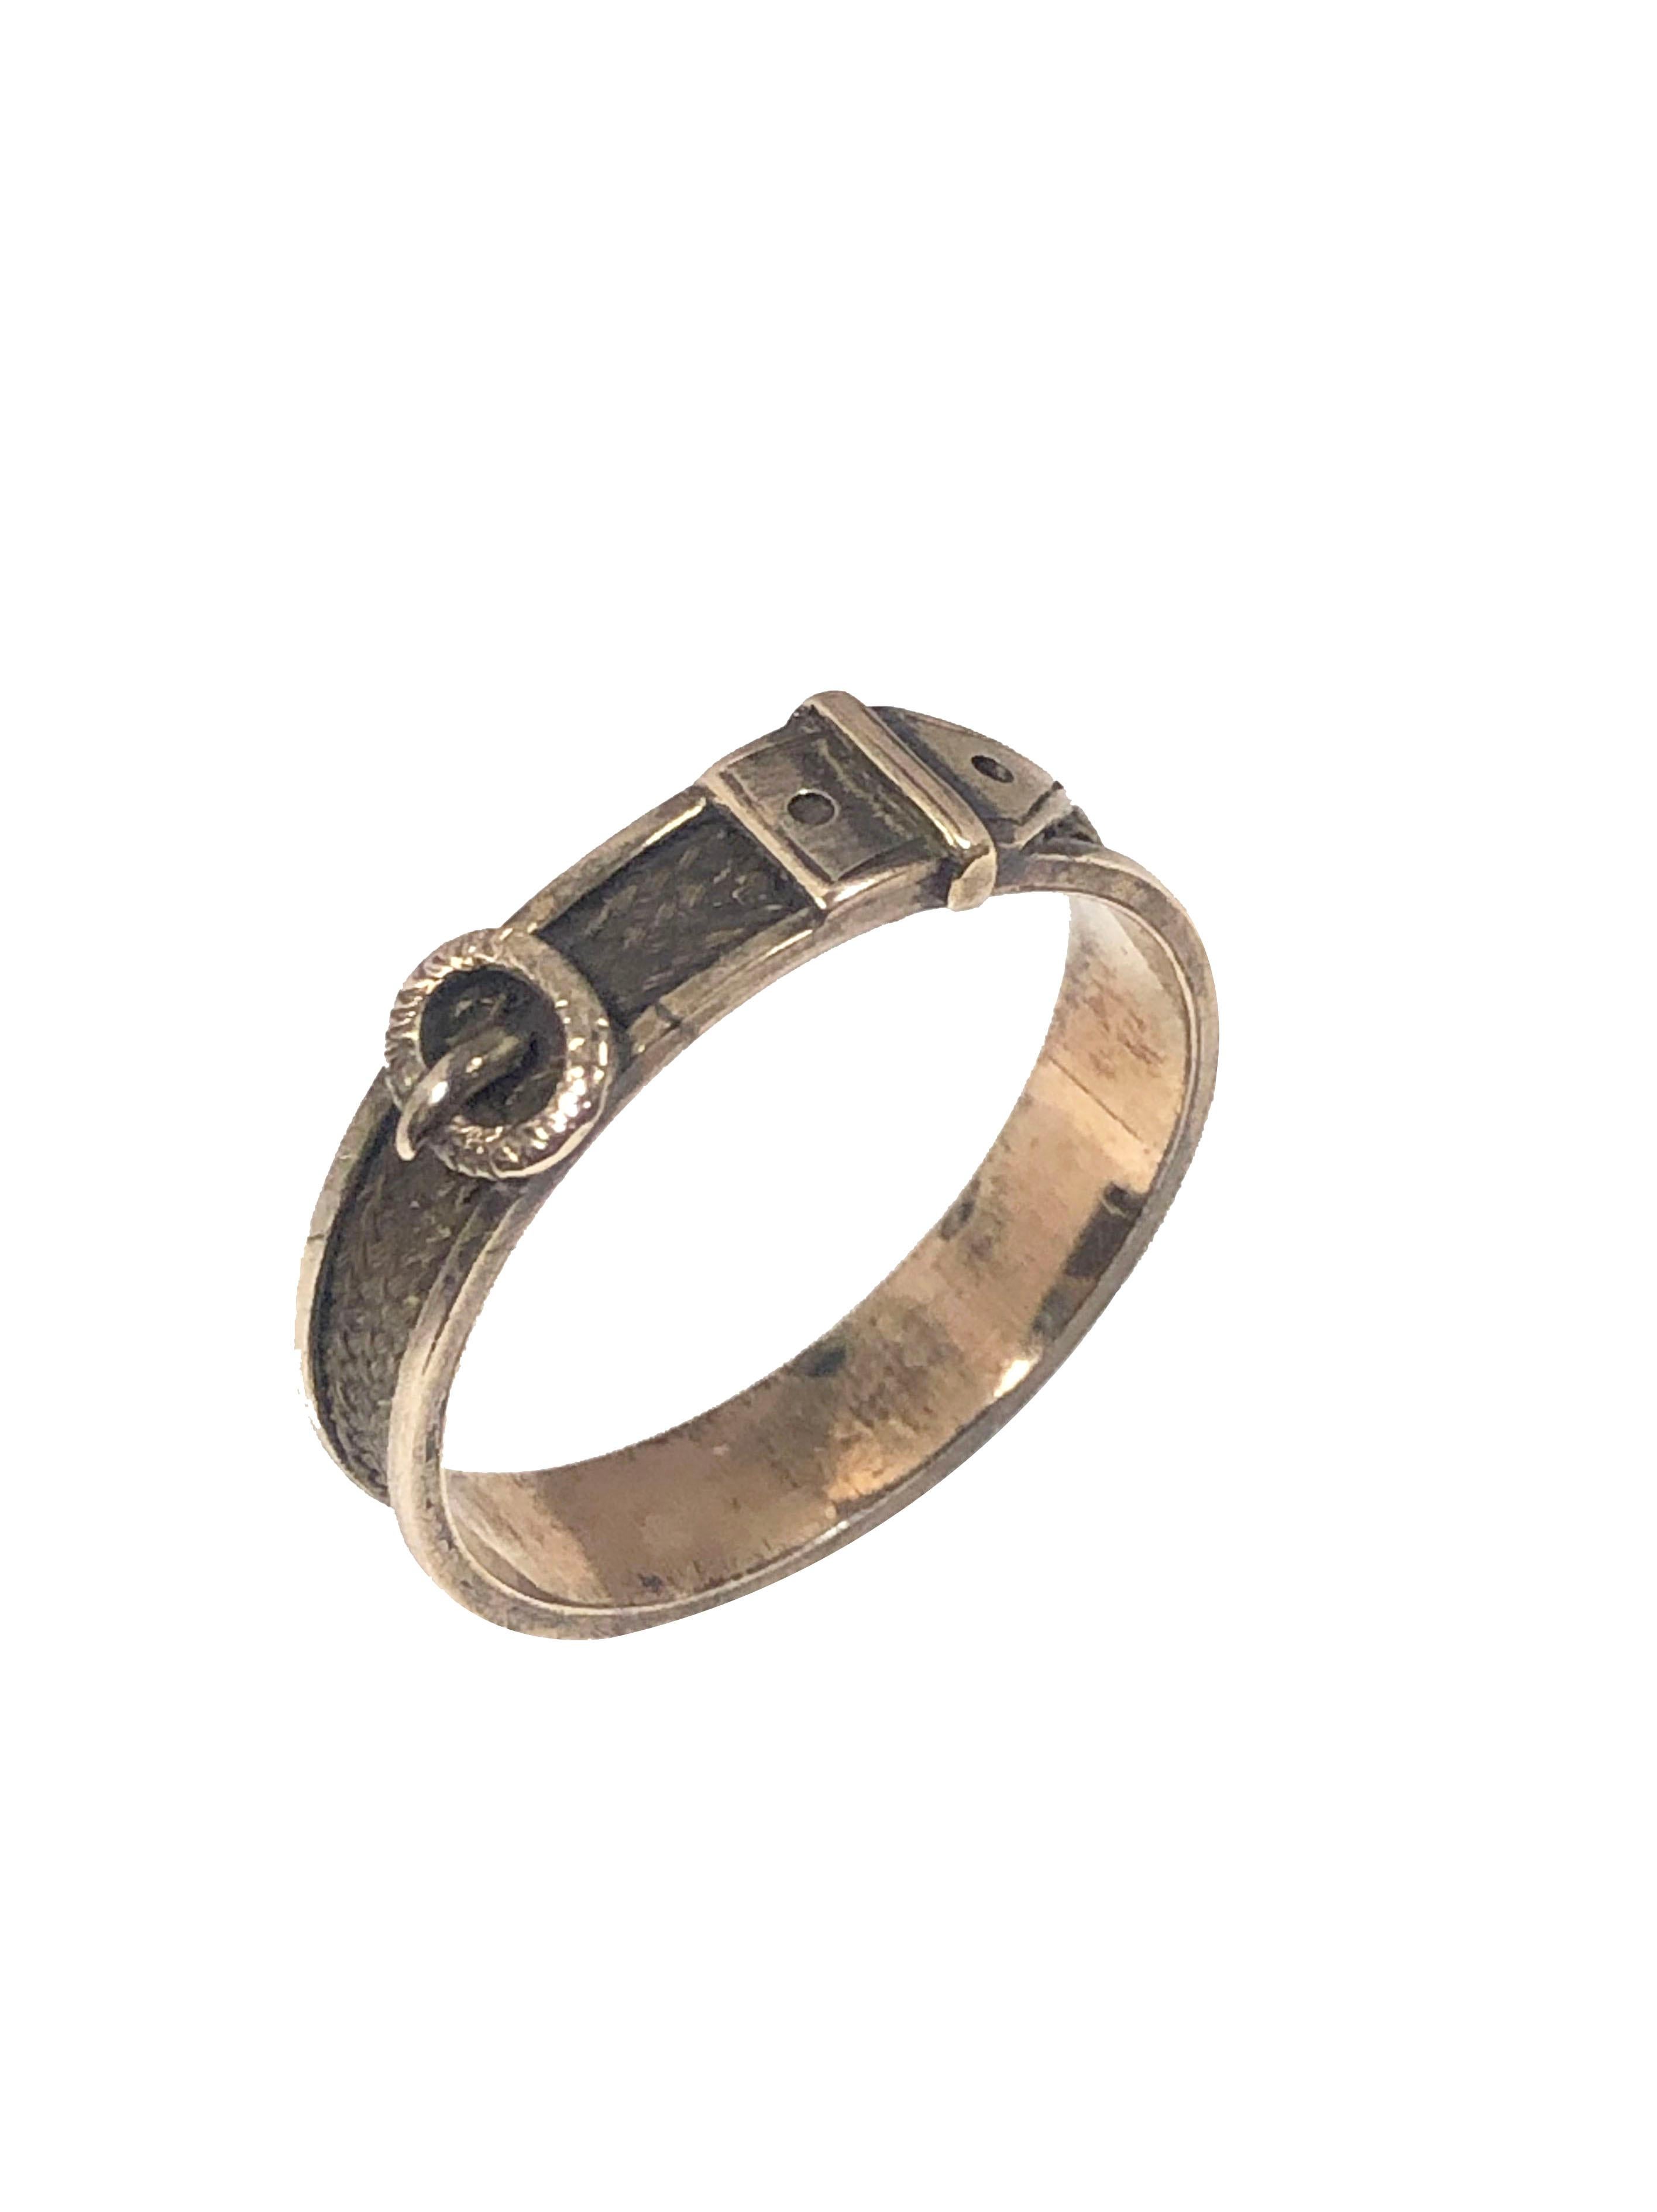 Mid Victorian Buckle Form Gold Mourning Memorial Ring For Sale 1